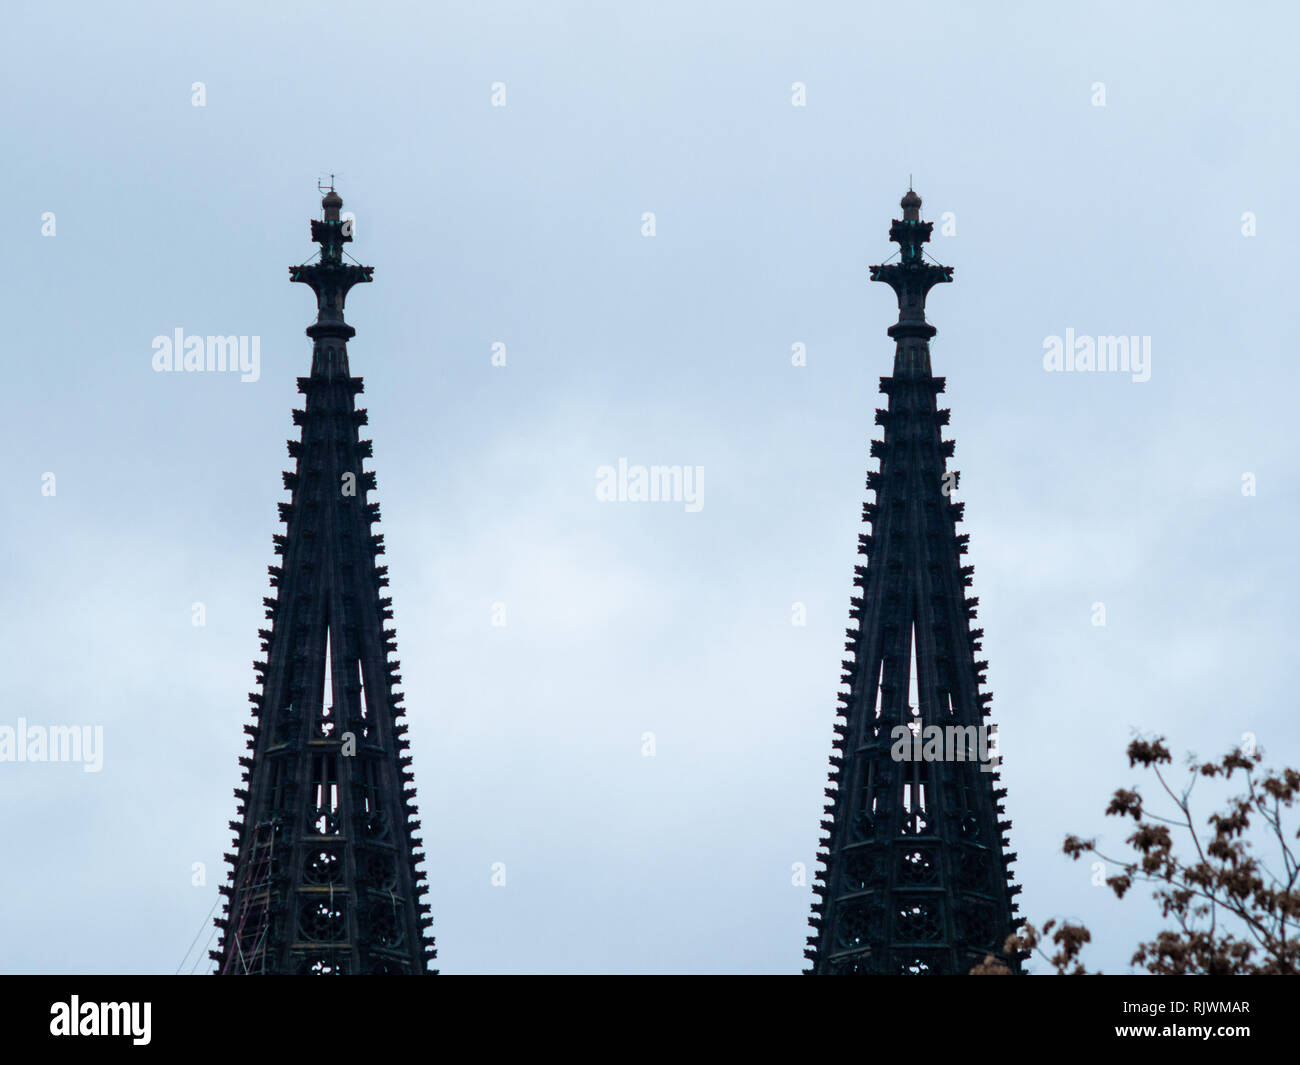 Minimalist shot of gothic Cologne Cathedral in Germany with scaffold against cloudy sky Stock Photo